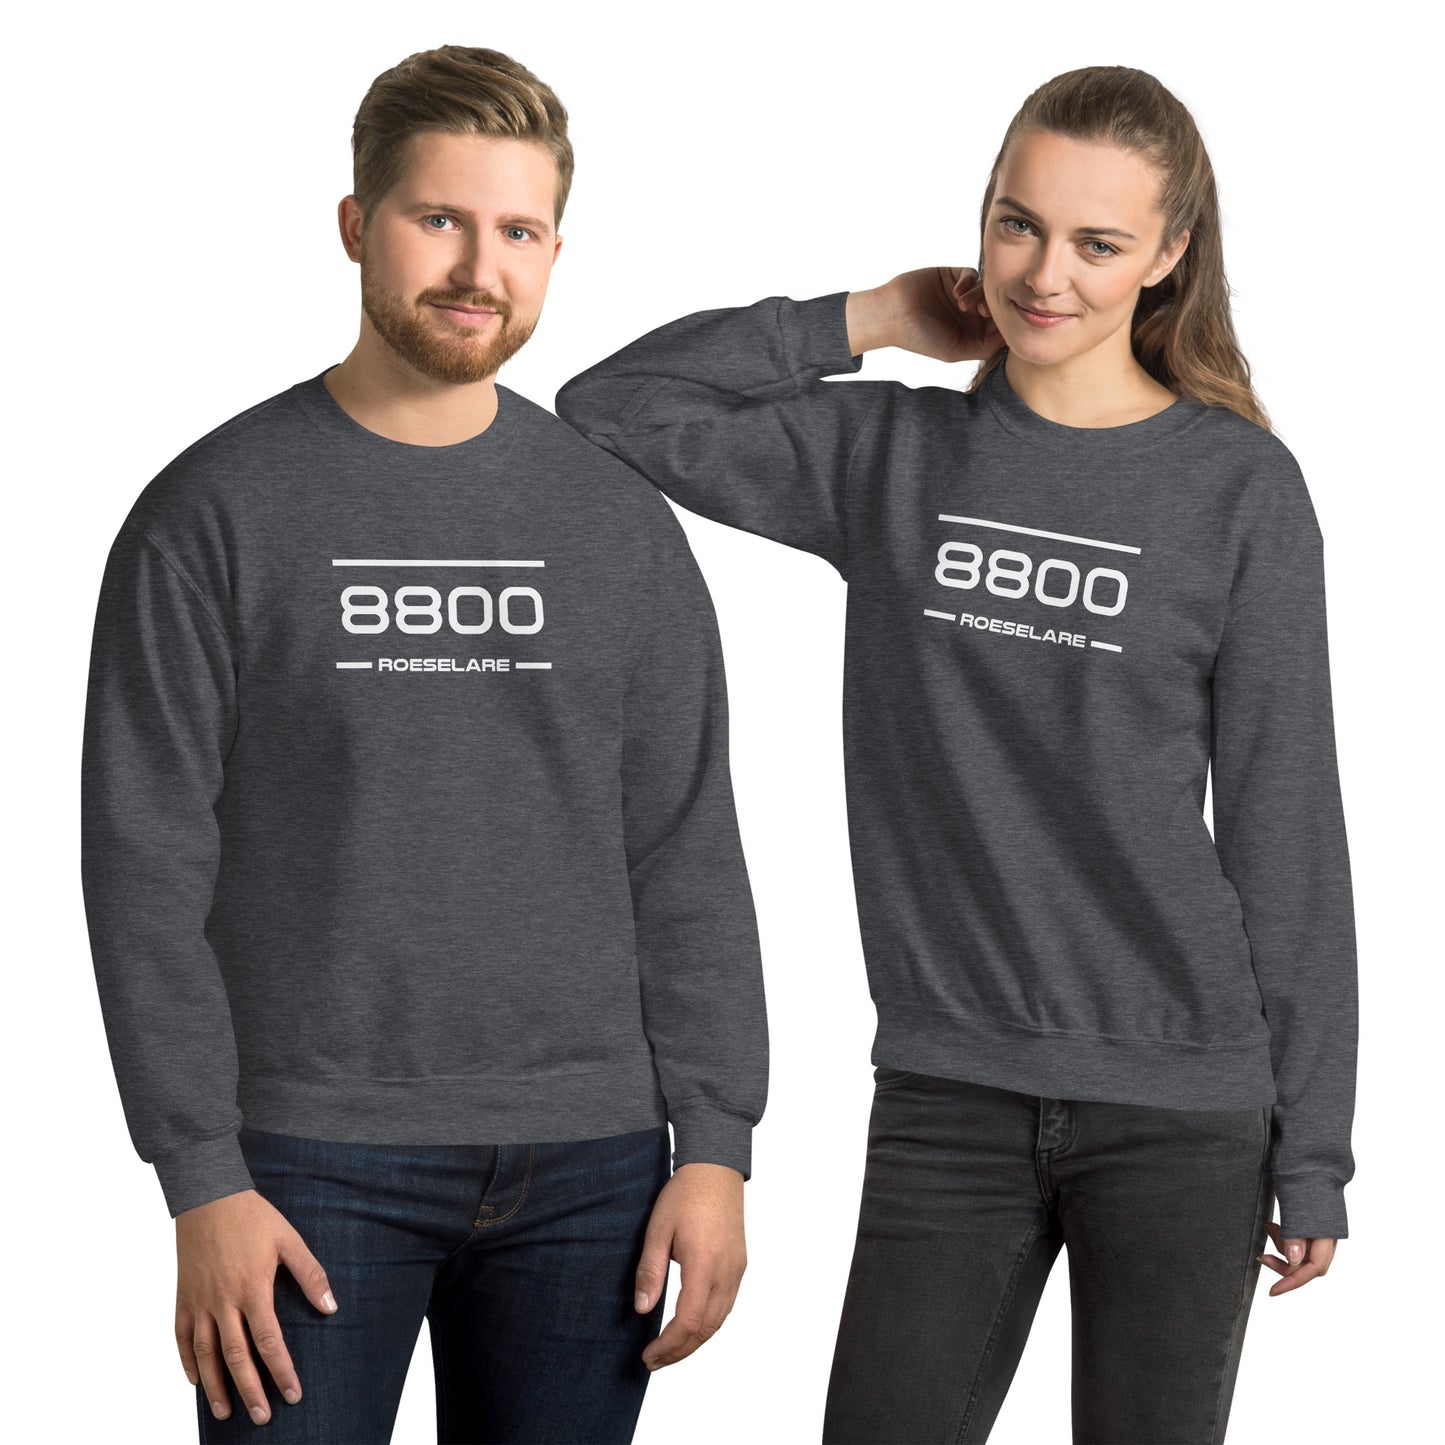 Sweater - 8800 - Roeselare (M/V)